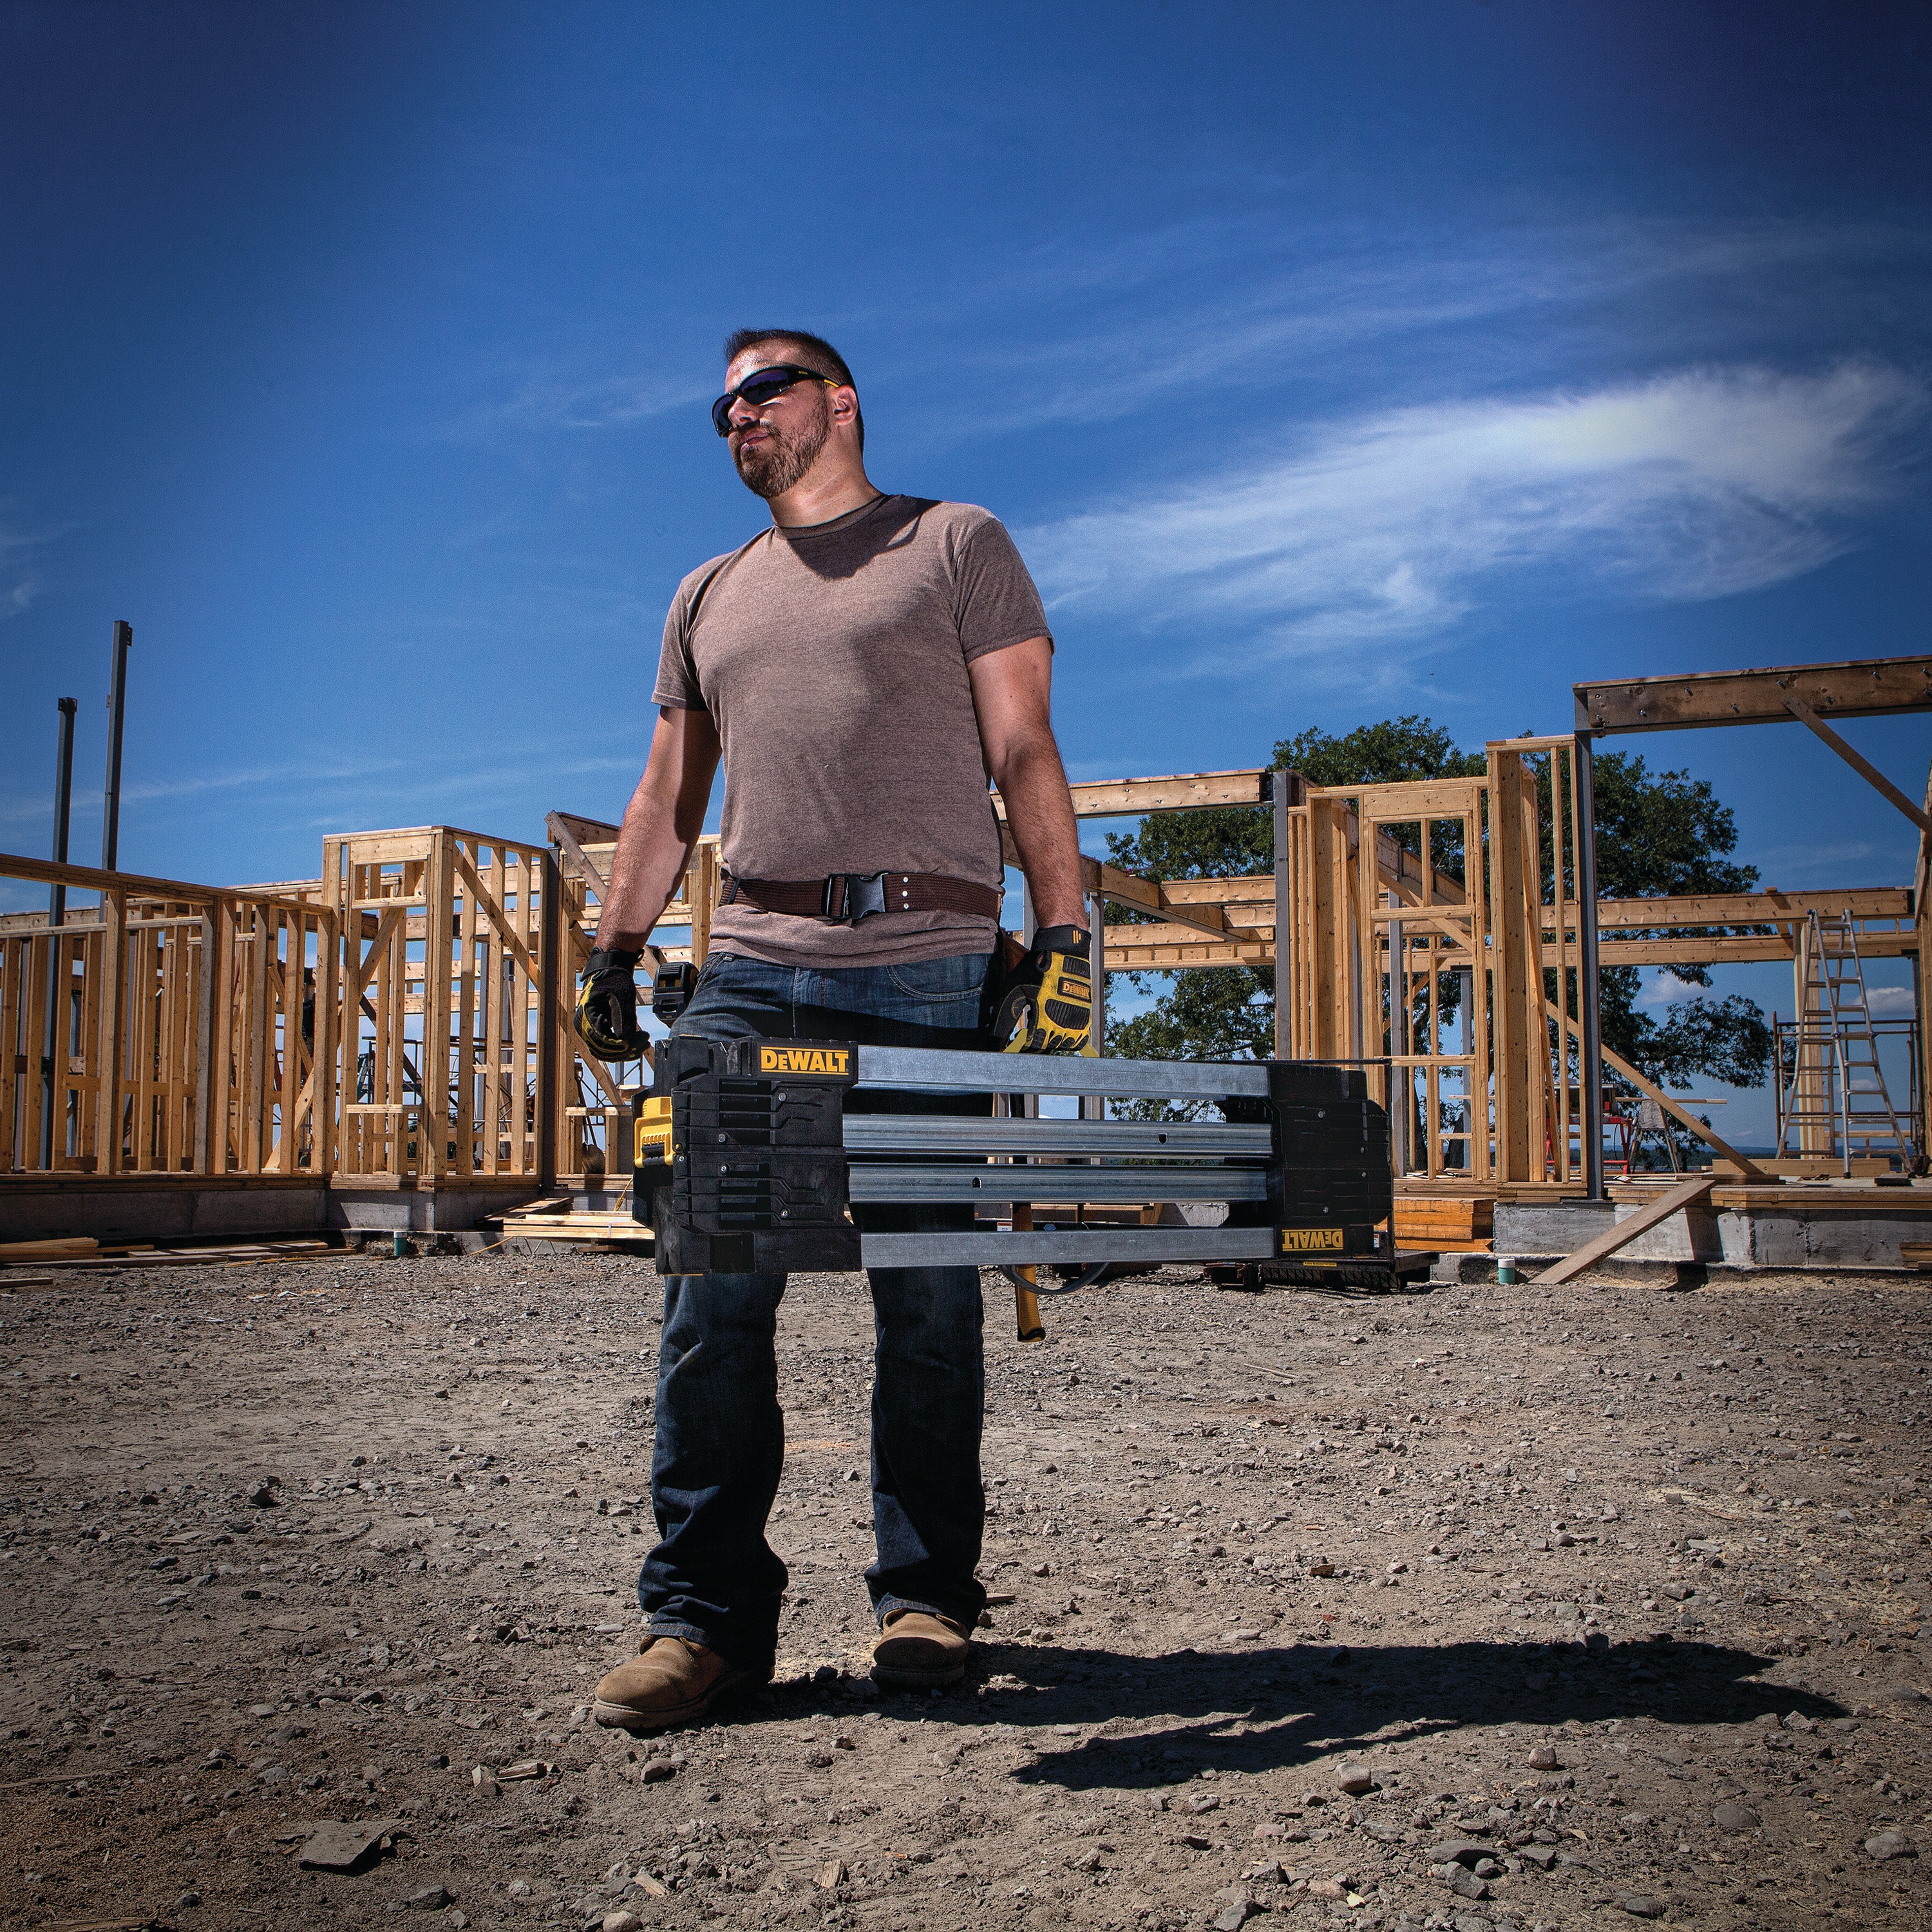 Folded metal folding sawhorse being carried by a person at a worksite.